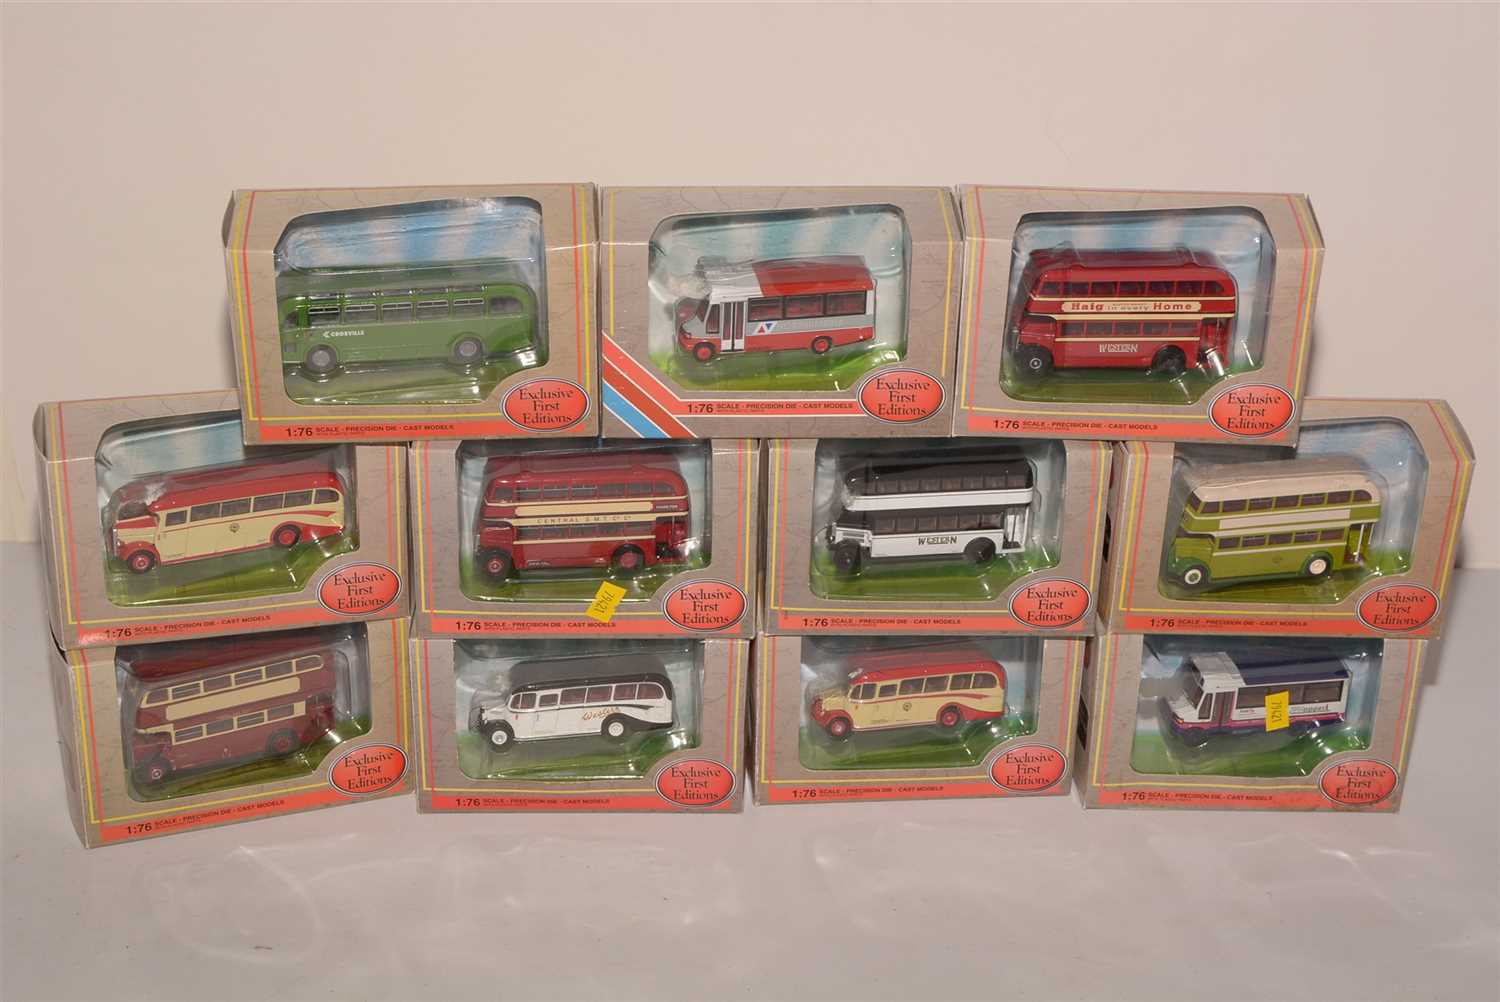 Lot 1350 - Die-cast model buses by Exclusive First Editions.